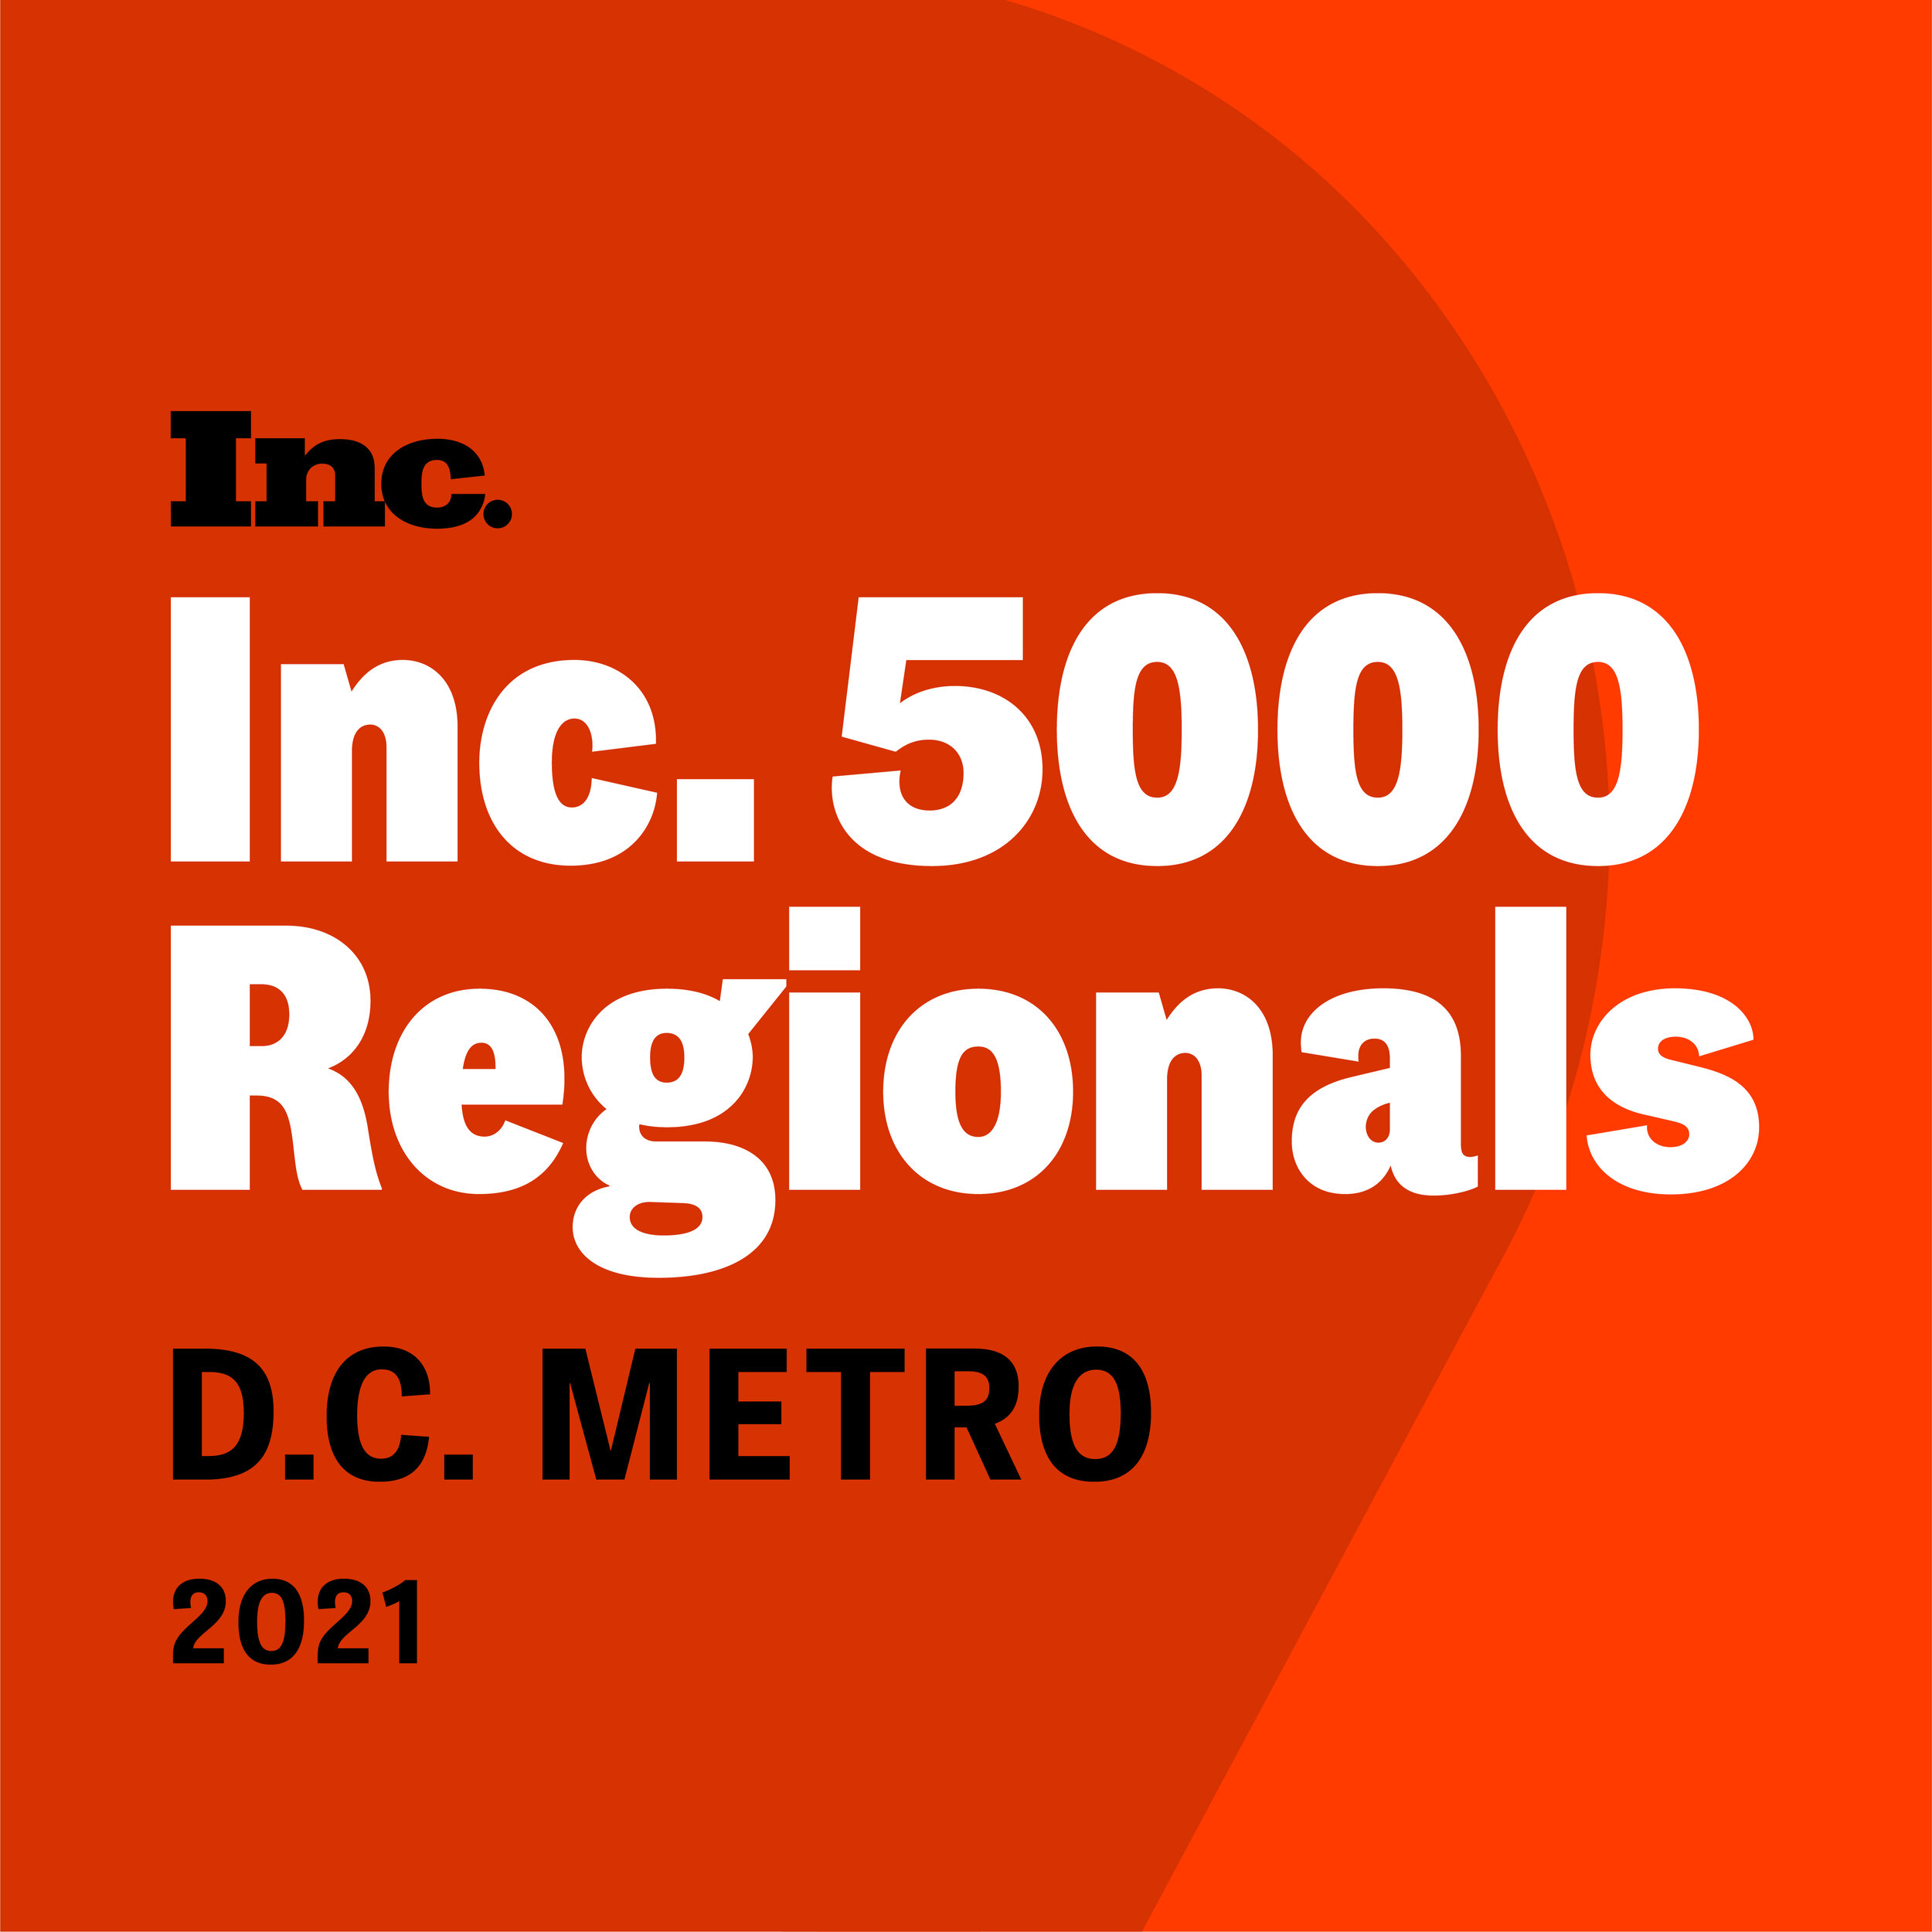 endelse Flock forræderi With Two-Year Revenue Growth of 680%, ACS Ranks No. 13 on Inc. Magazine's  2021 List of the Fastest-Growing Private Companies in the DC Metro Region —  Assured Consulting Solutions